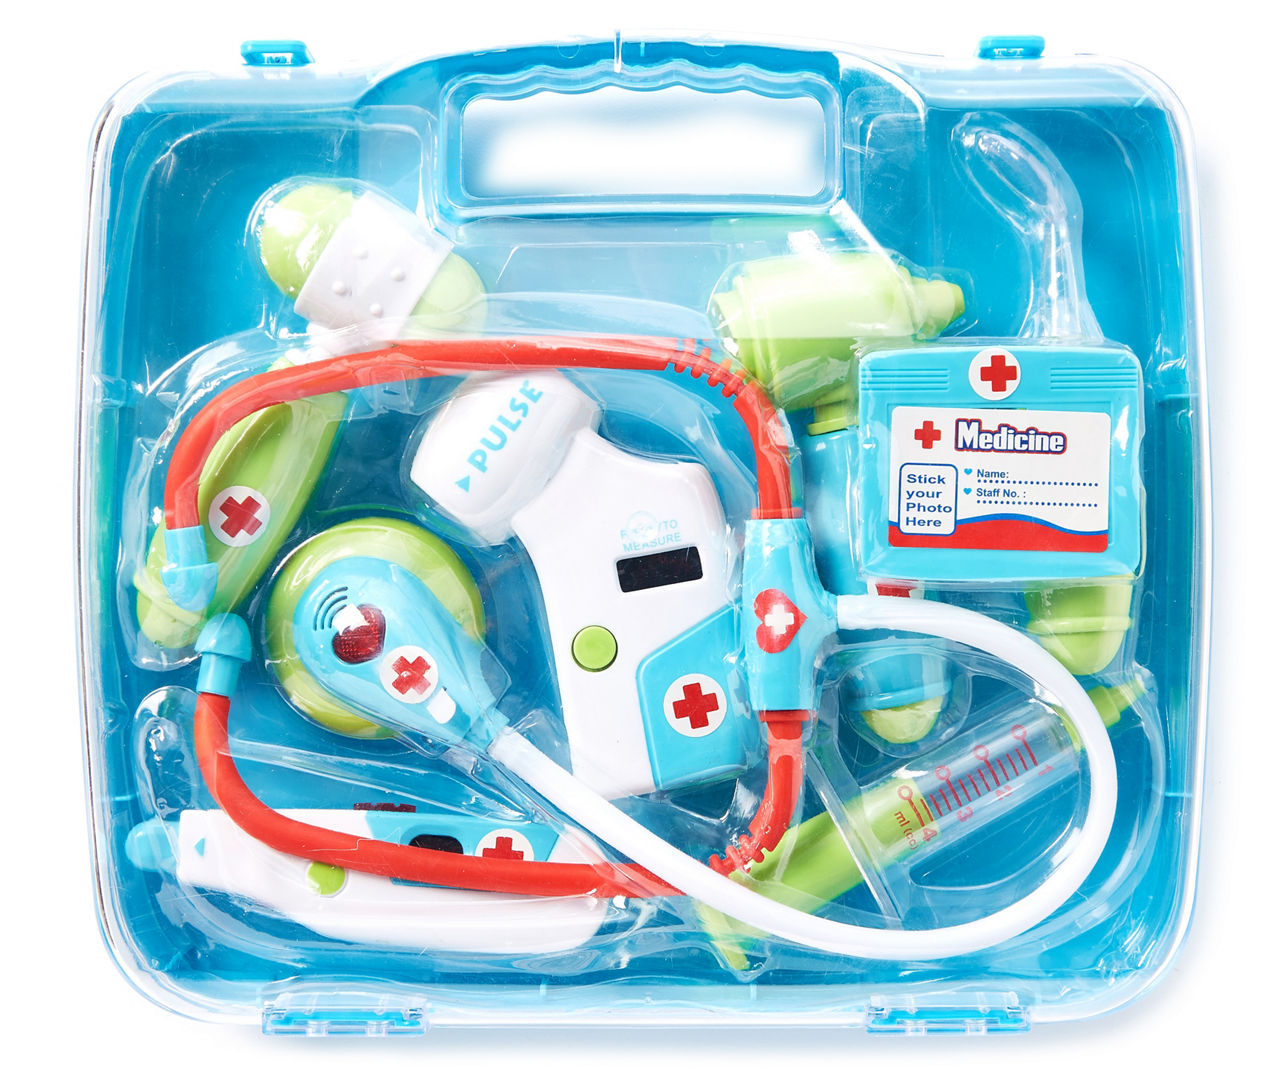 Kids doctor kit • Compare (53 products) see prices »